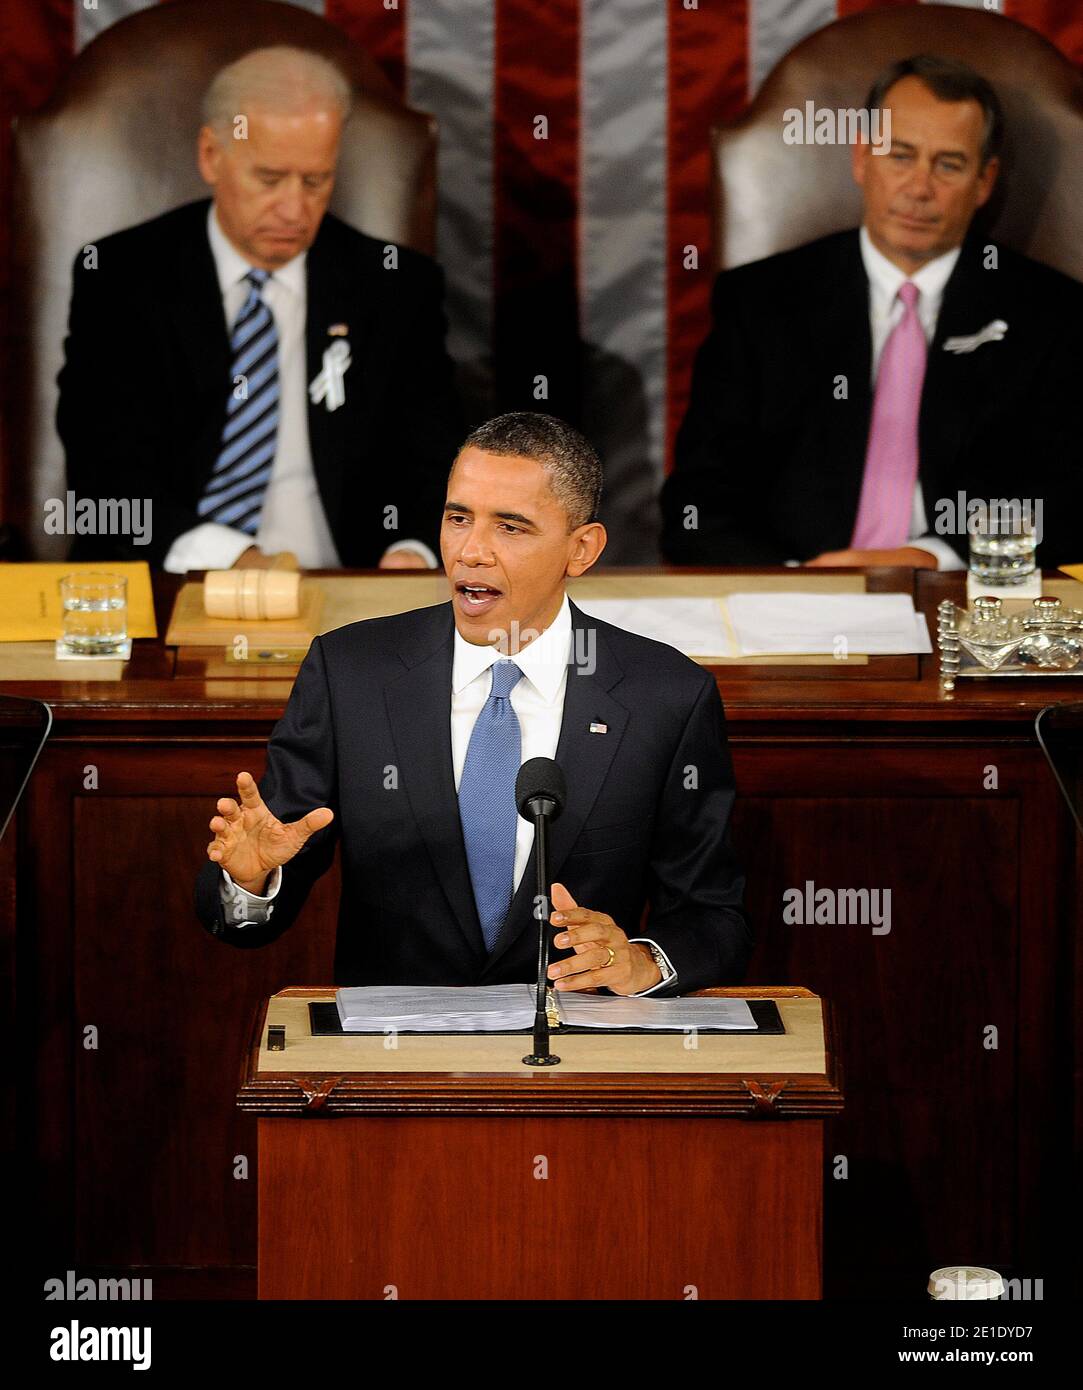 U.S. President Barack Obama, flanked by Vice President Joe Biden (L) and Speaker of the House John Boehner (R-OH), addresses a Joint Session of Congress while delivering his State of the Union speech in Washington, DC, USA, January 25, 2011. Photo by Olivier Douliery/ABACAPRESS.COM Stock Photo